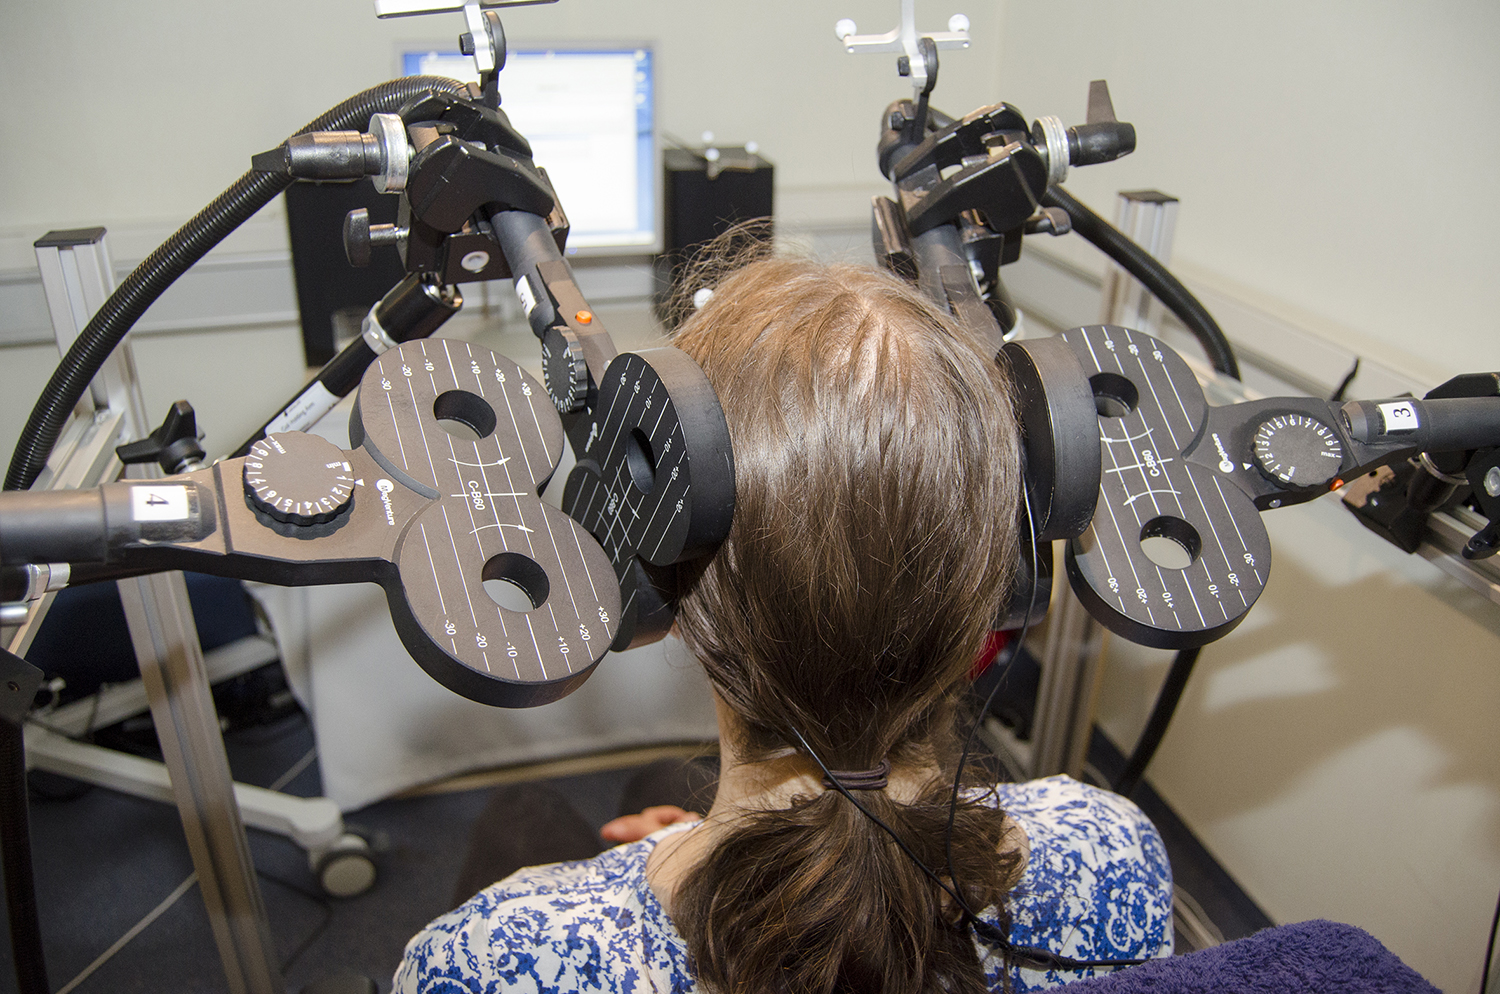 Scientists are using transcranial magnetic stimulation to understand which brain regions are important for communication. Image credit - Mathias Von Kriegstein